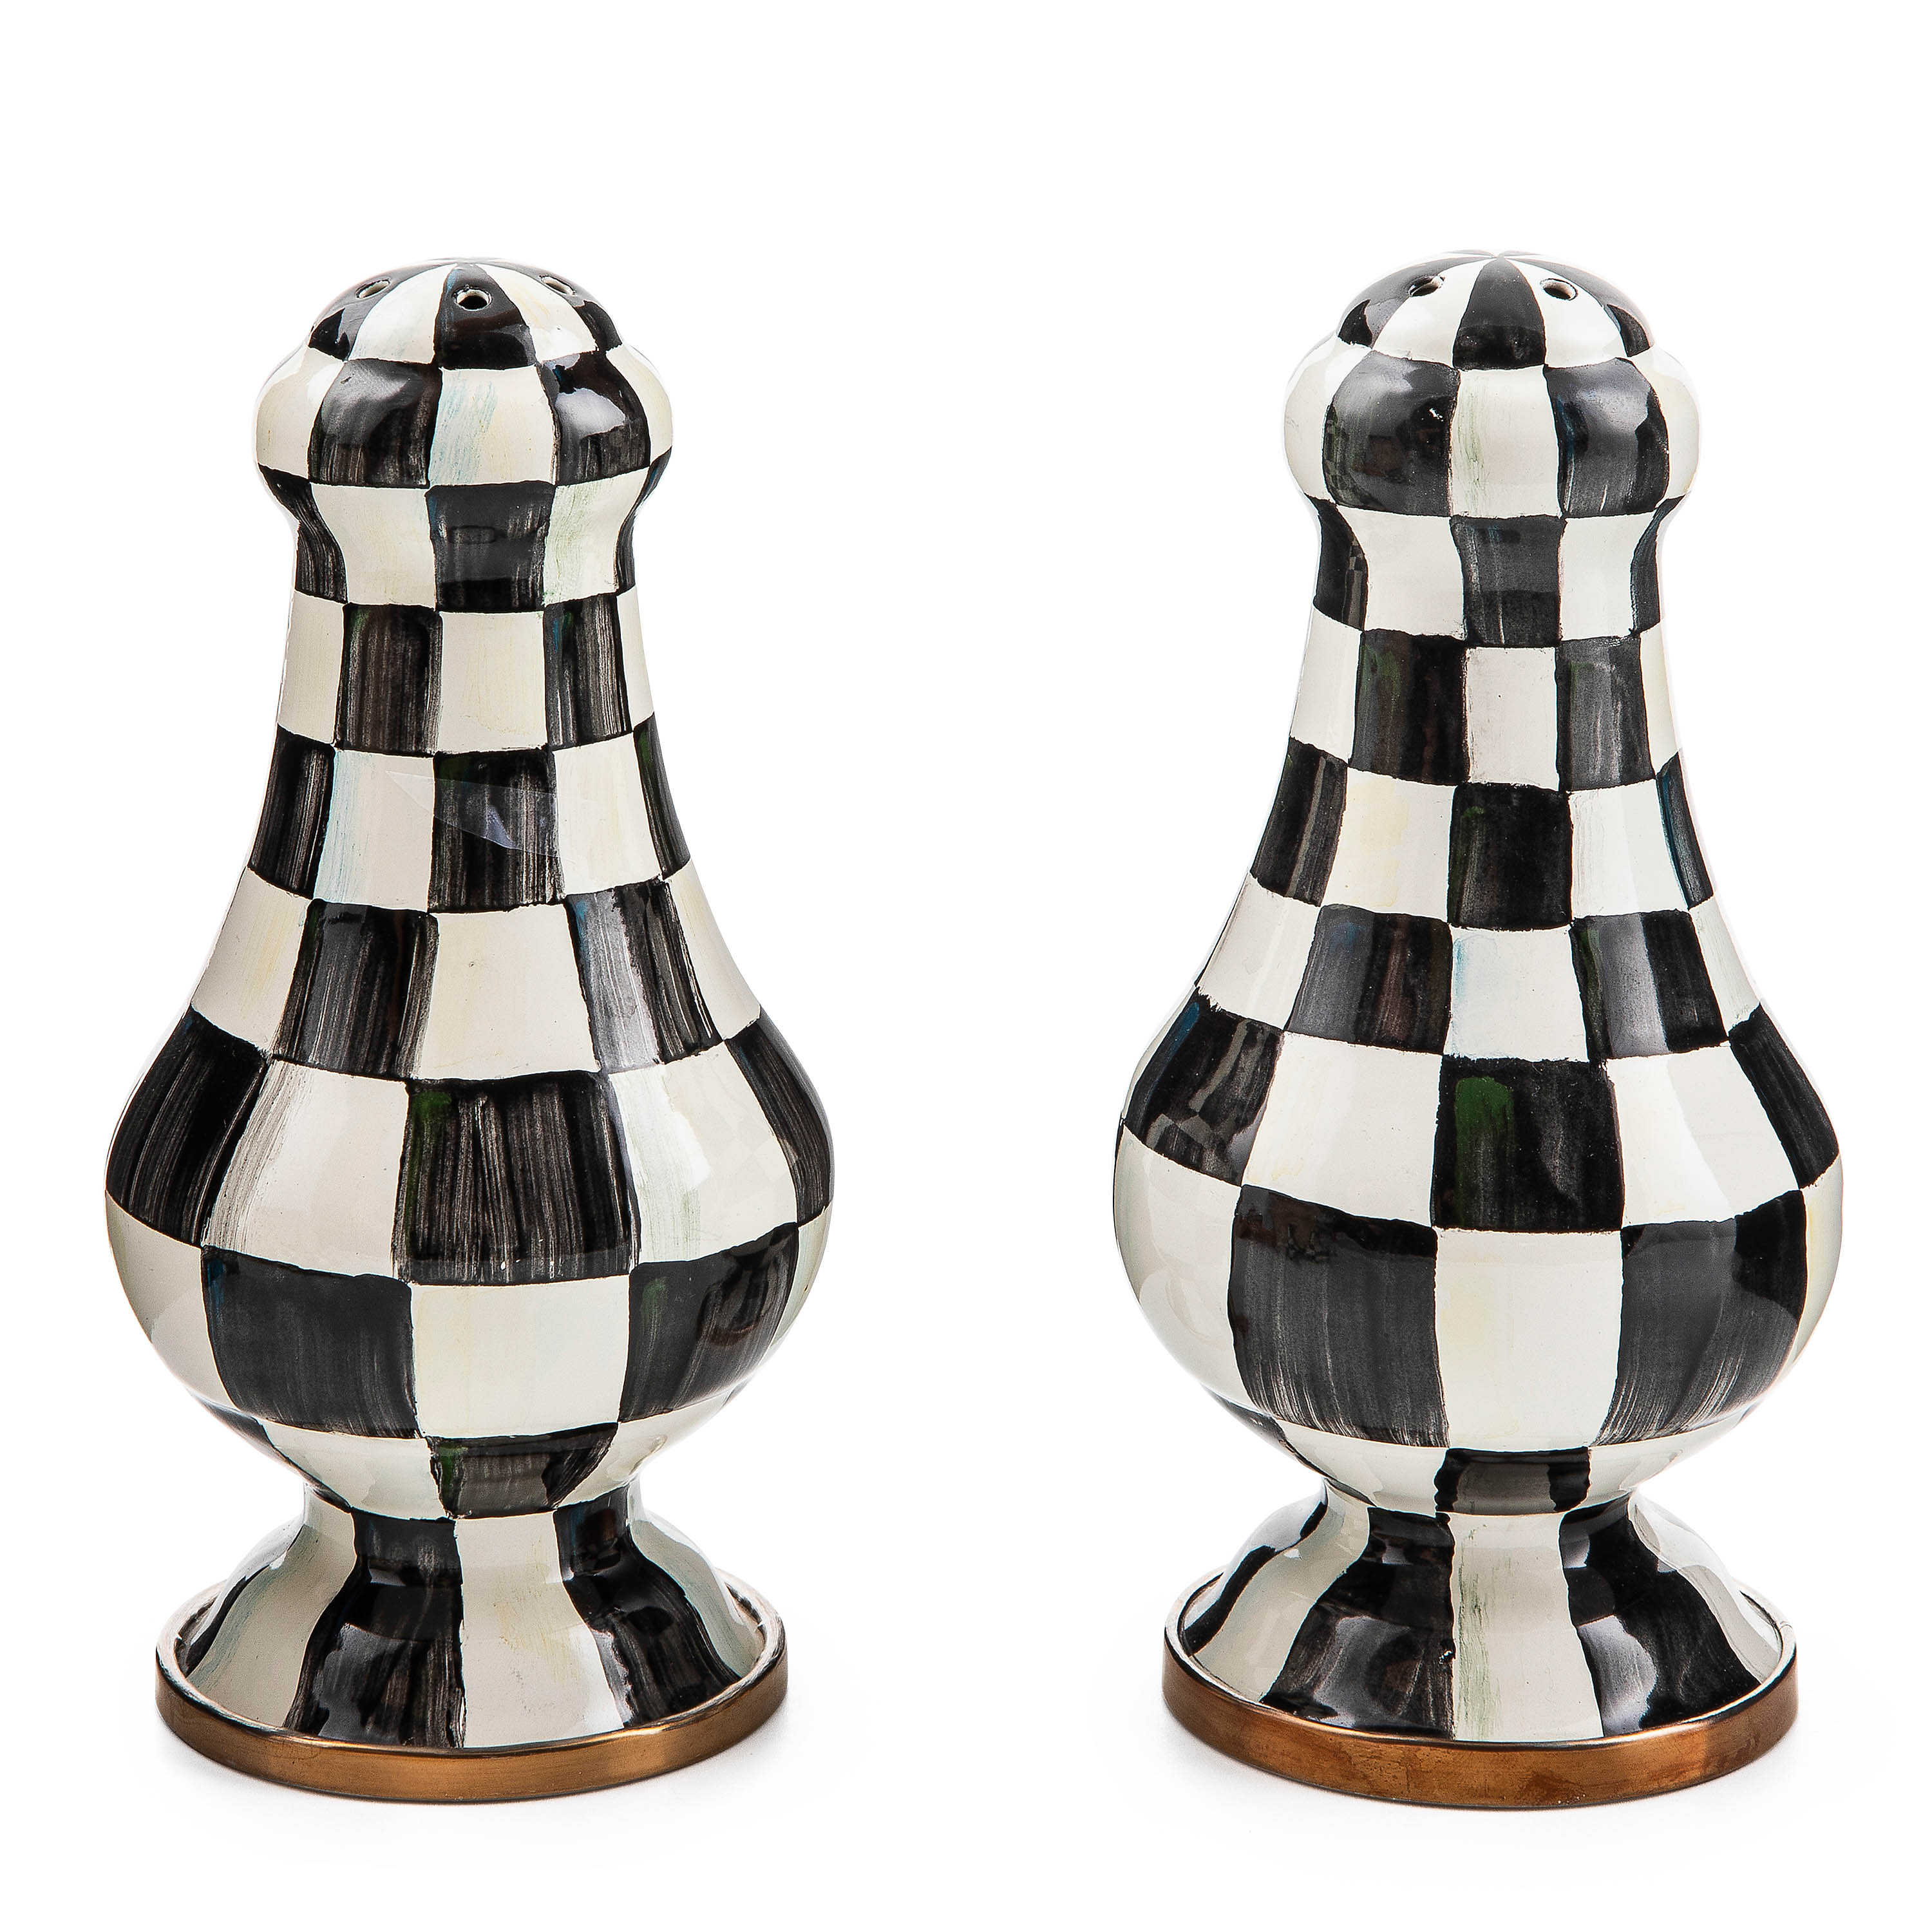 Courtly Check Large Salt & Pepper Shakers mackenzie-childs Panama 0